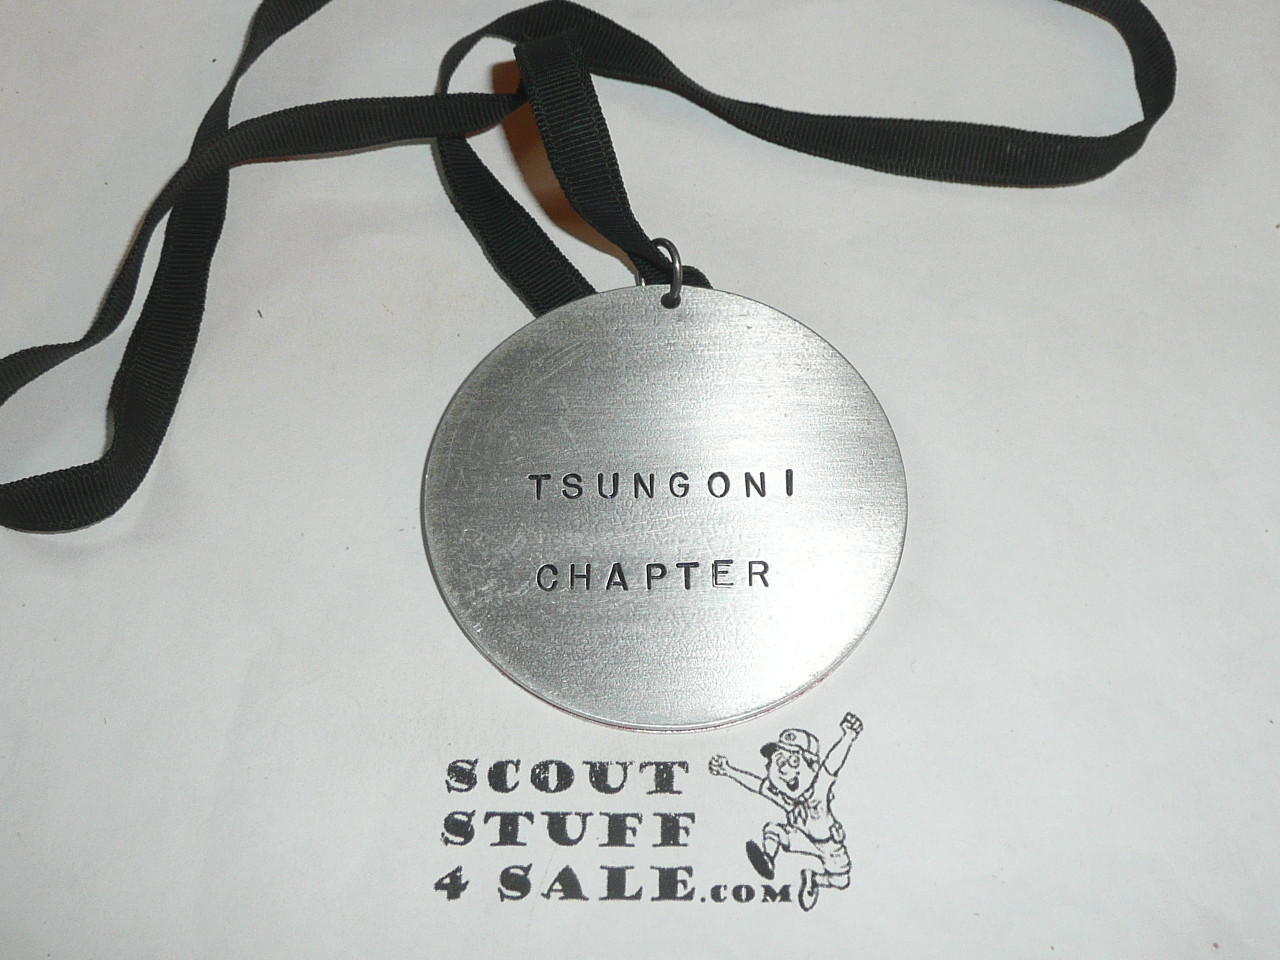 Order of the Arrow Lodge #566 Malibu, Tsungoni Chapter Advisor Medallion, made by Bill Stroh